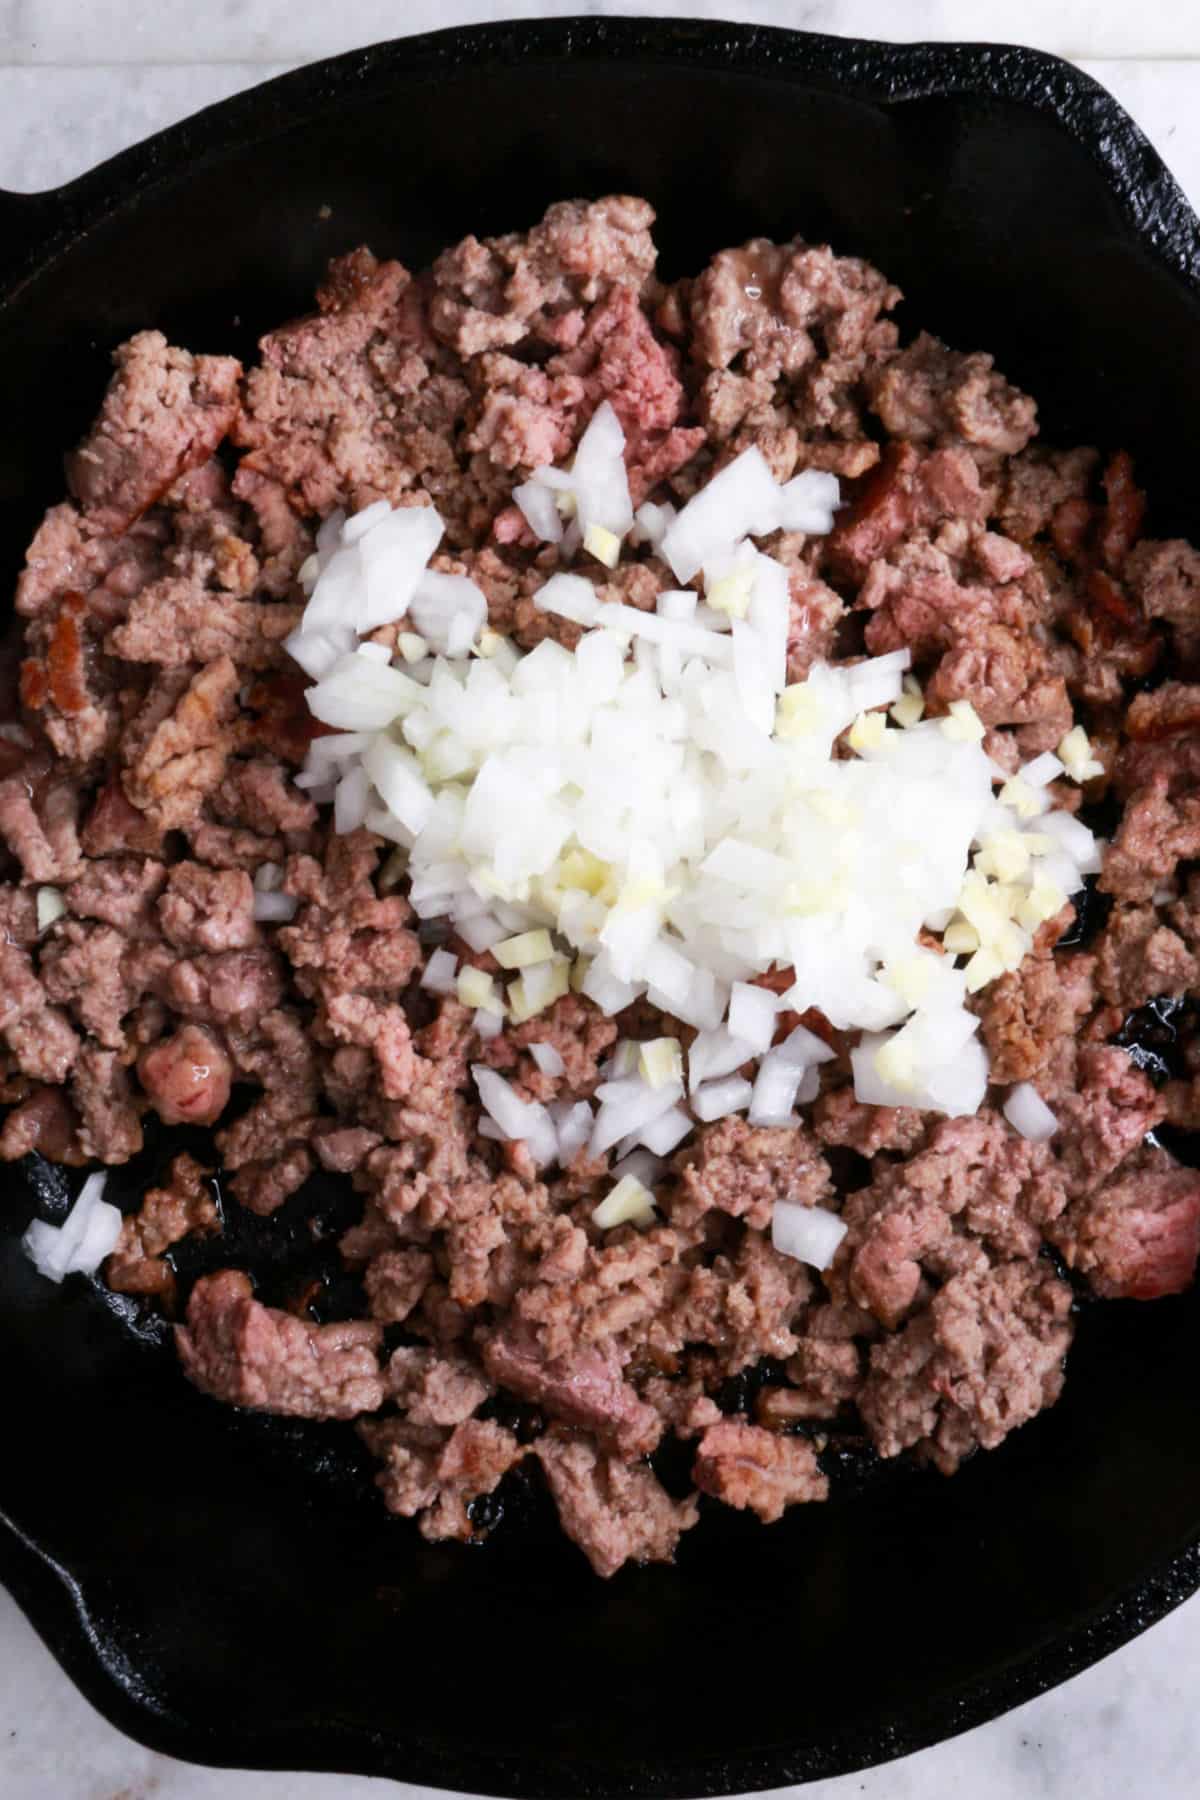 Ground beef in a cast iron with diced onion and garlic